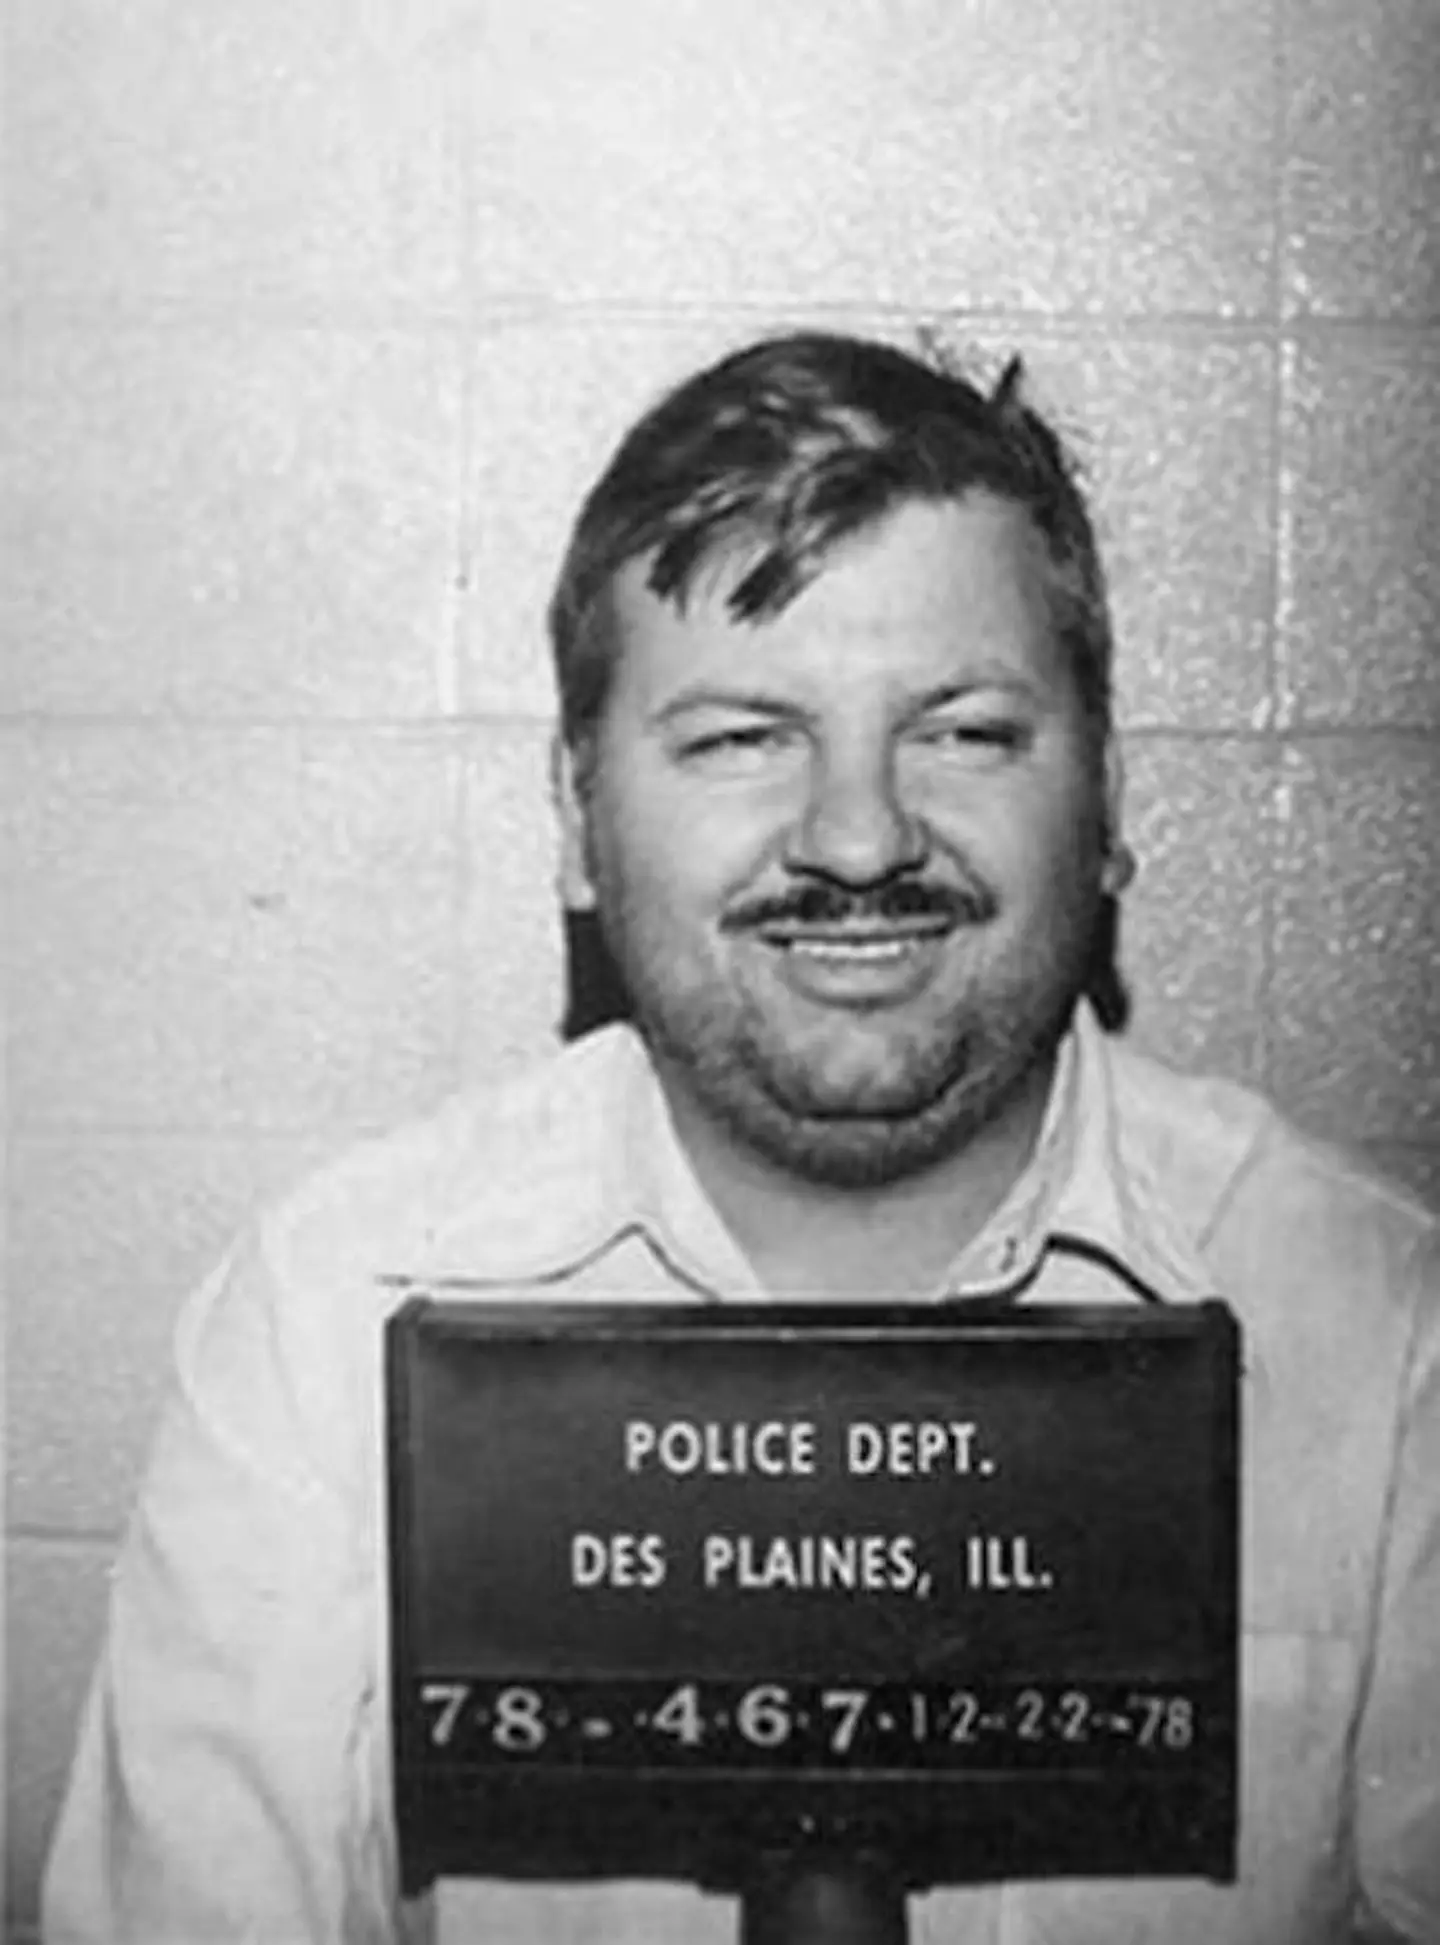 Gacy was executed for his crimes in 1994.